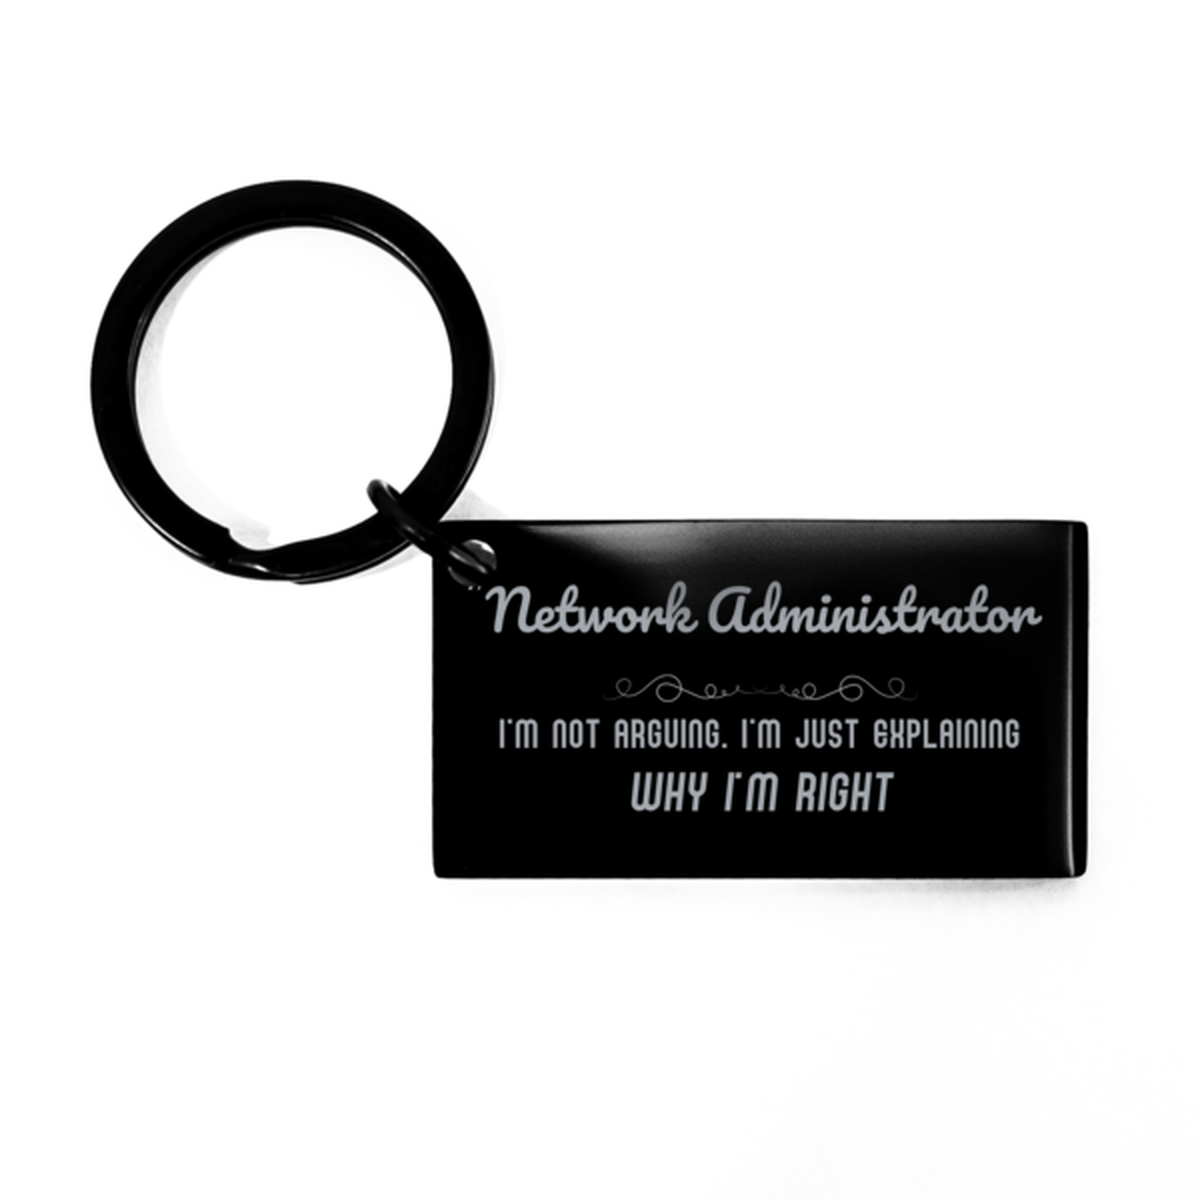 Network Administrator I'm not Arguing. I'm Just Explaining Why I'm RIGHT Keychain, Funny Saying Quote Network Administrator Gifts For Network Administrator Graduation Birthday Christmas Gifts for Men Women Coworker